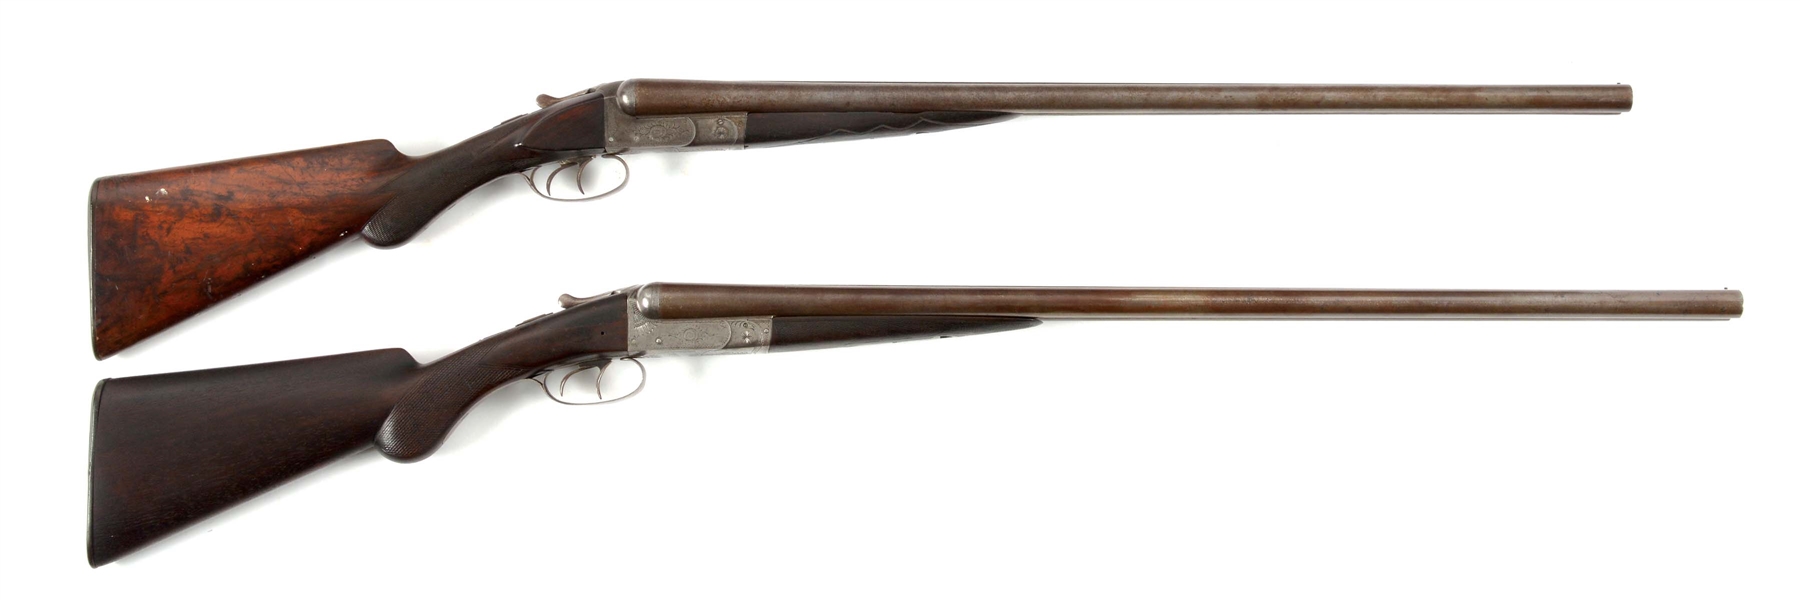 (A) LOT OF TWO: TWO WILKES BARRE SIDE BY SIDE SHOTGUNS.